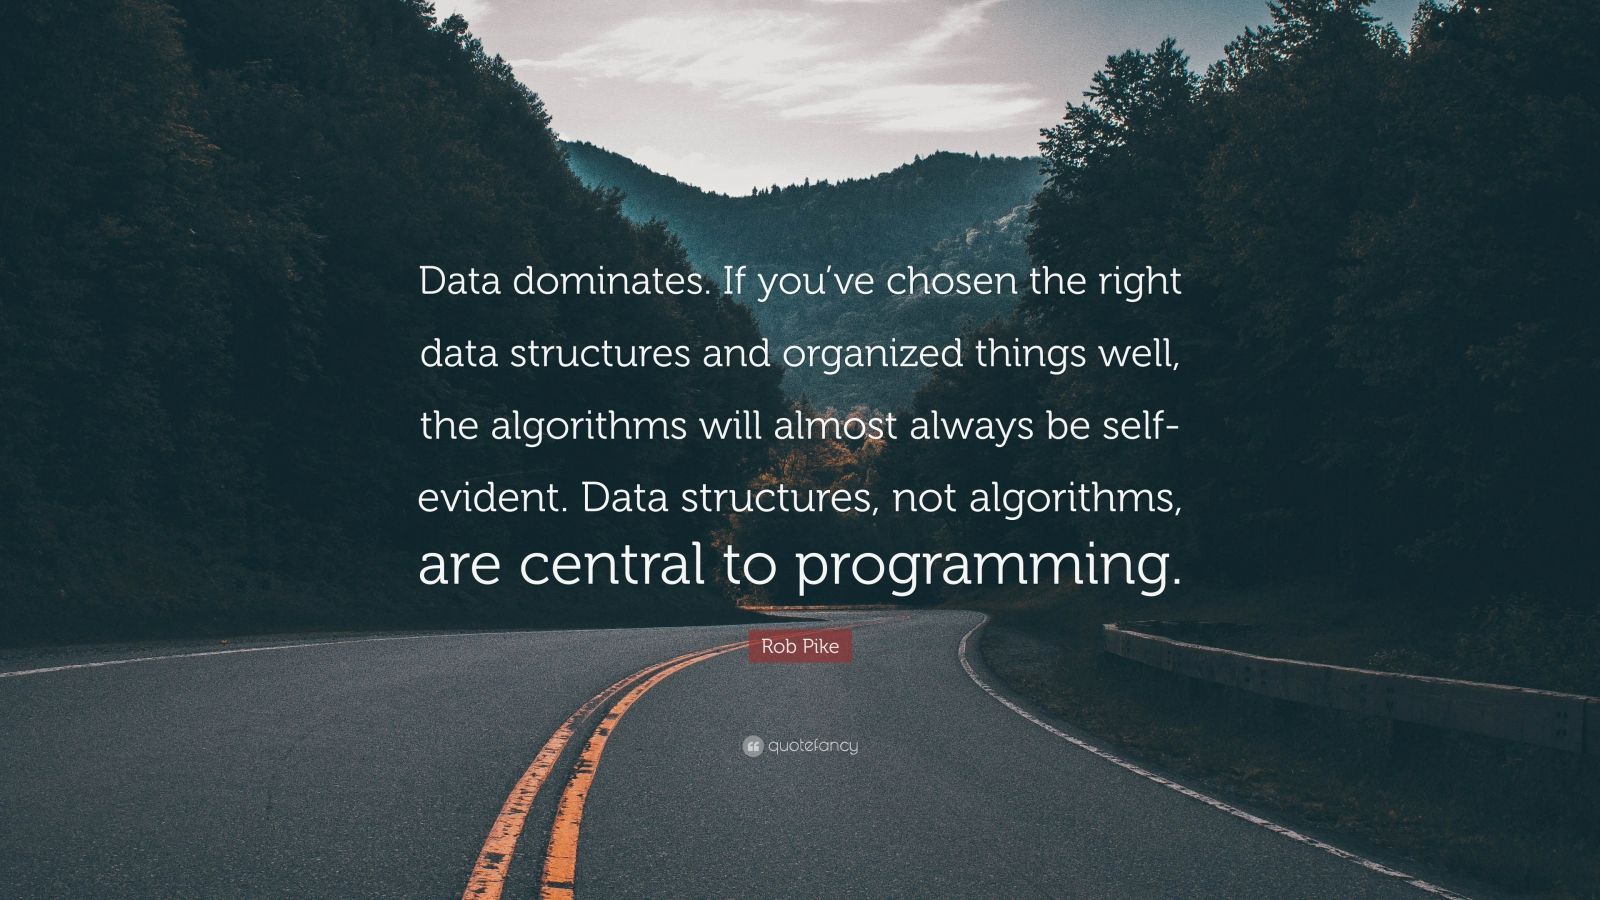 Rob Pike Quote: “Data dominates. If you've chosen the right data structures and organized things well, the algorithms will almost always .”